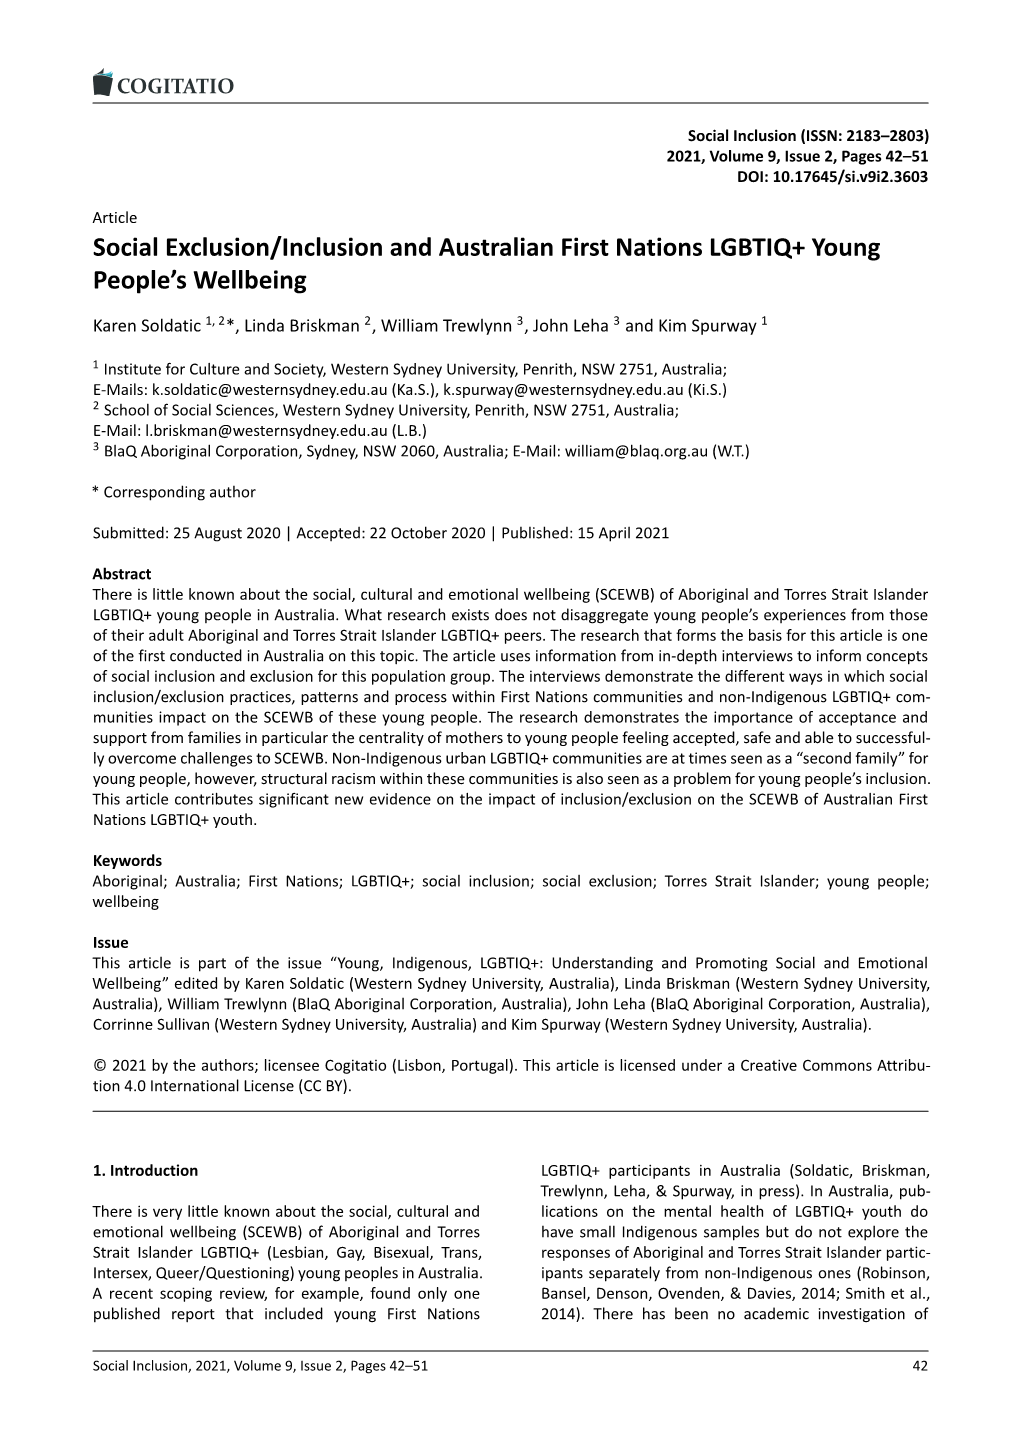 Social Exclusion/Inclusion and Australian First Nations LGBTIQ+ Young People’S Wellbeing